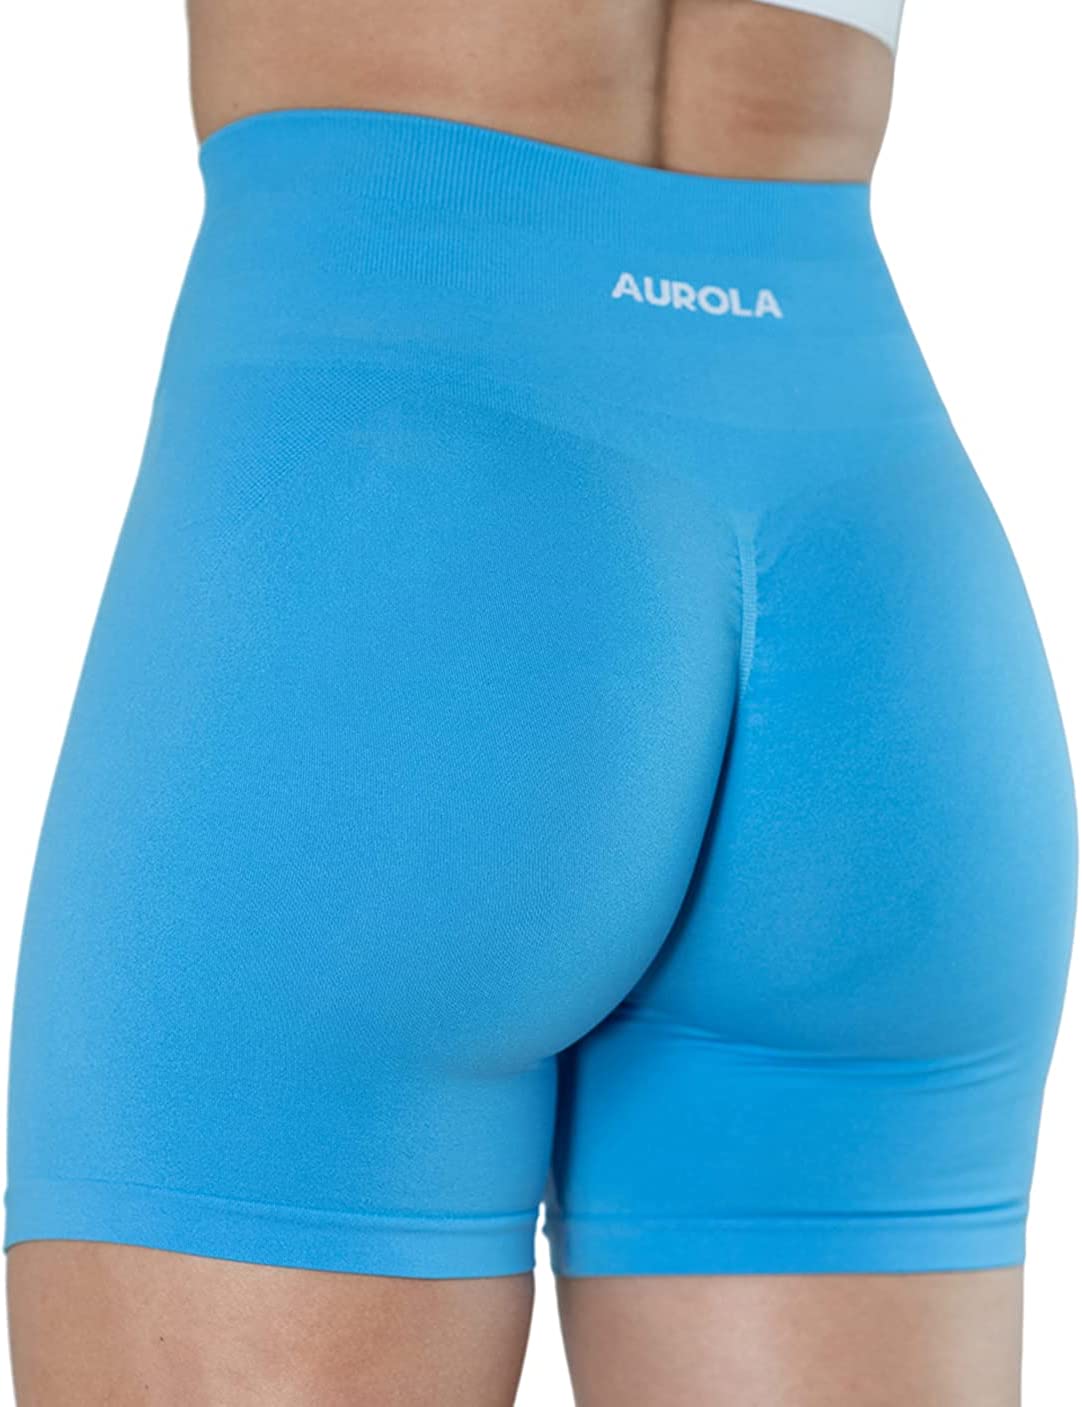 AUROLA Intensify Workout Shorts 3 Pieces Pack Sets for Women